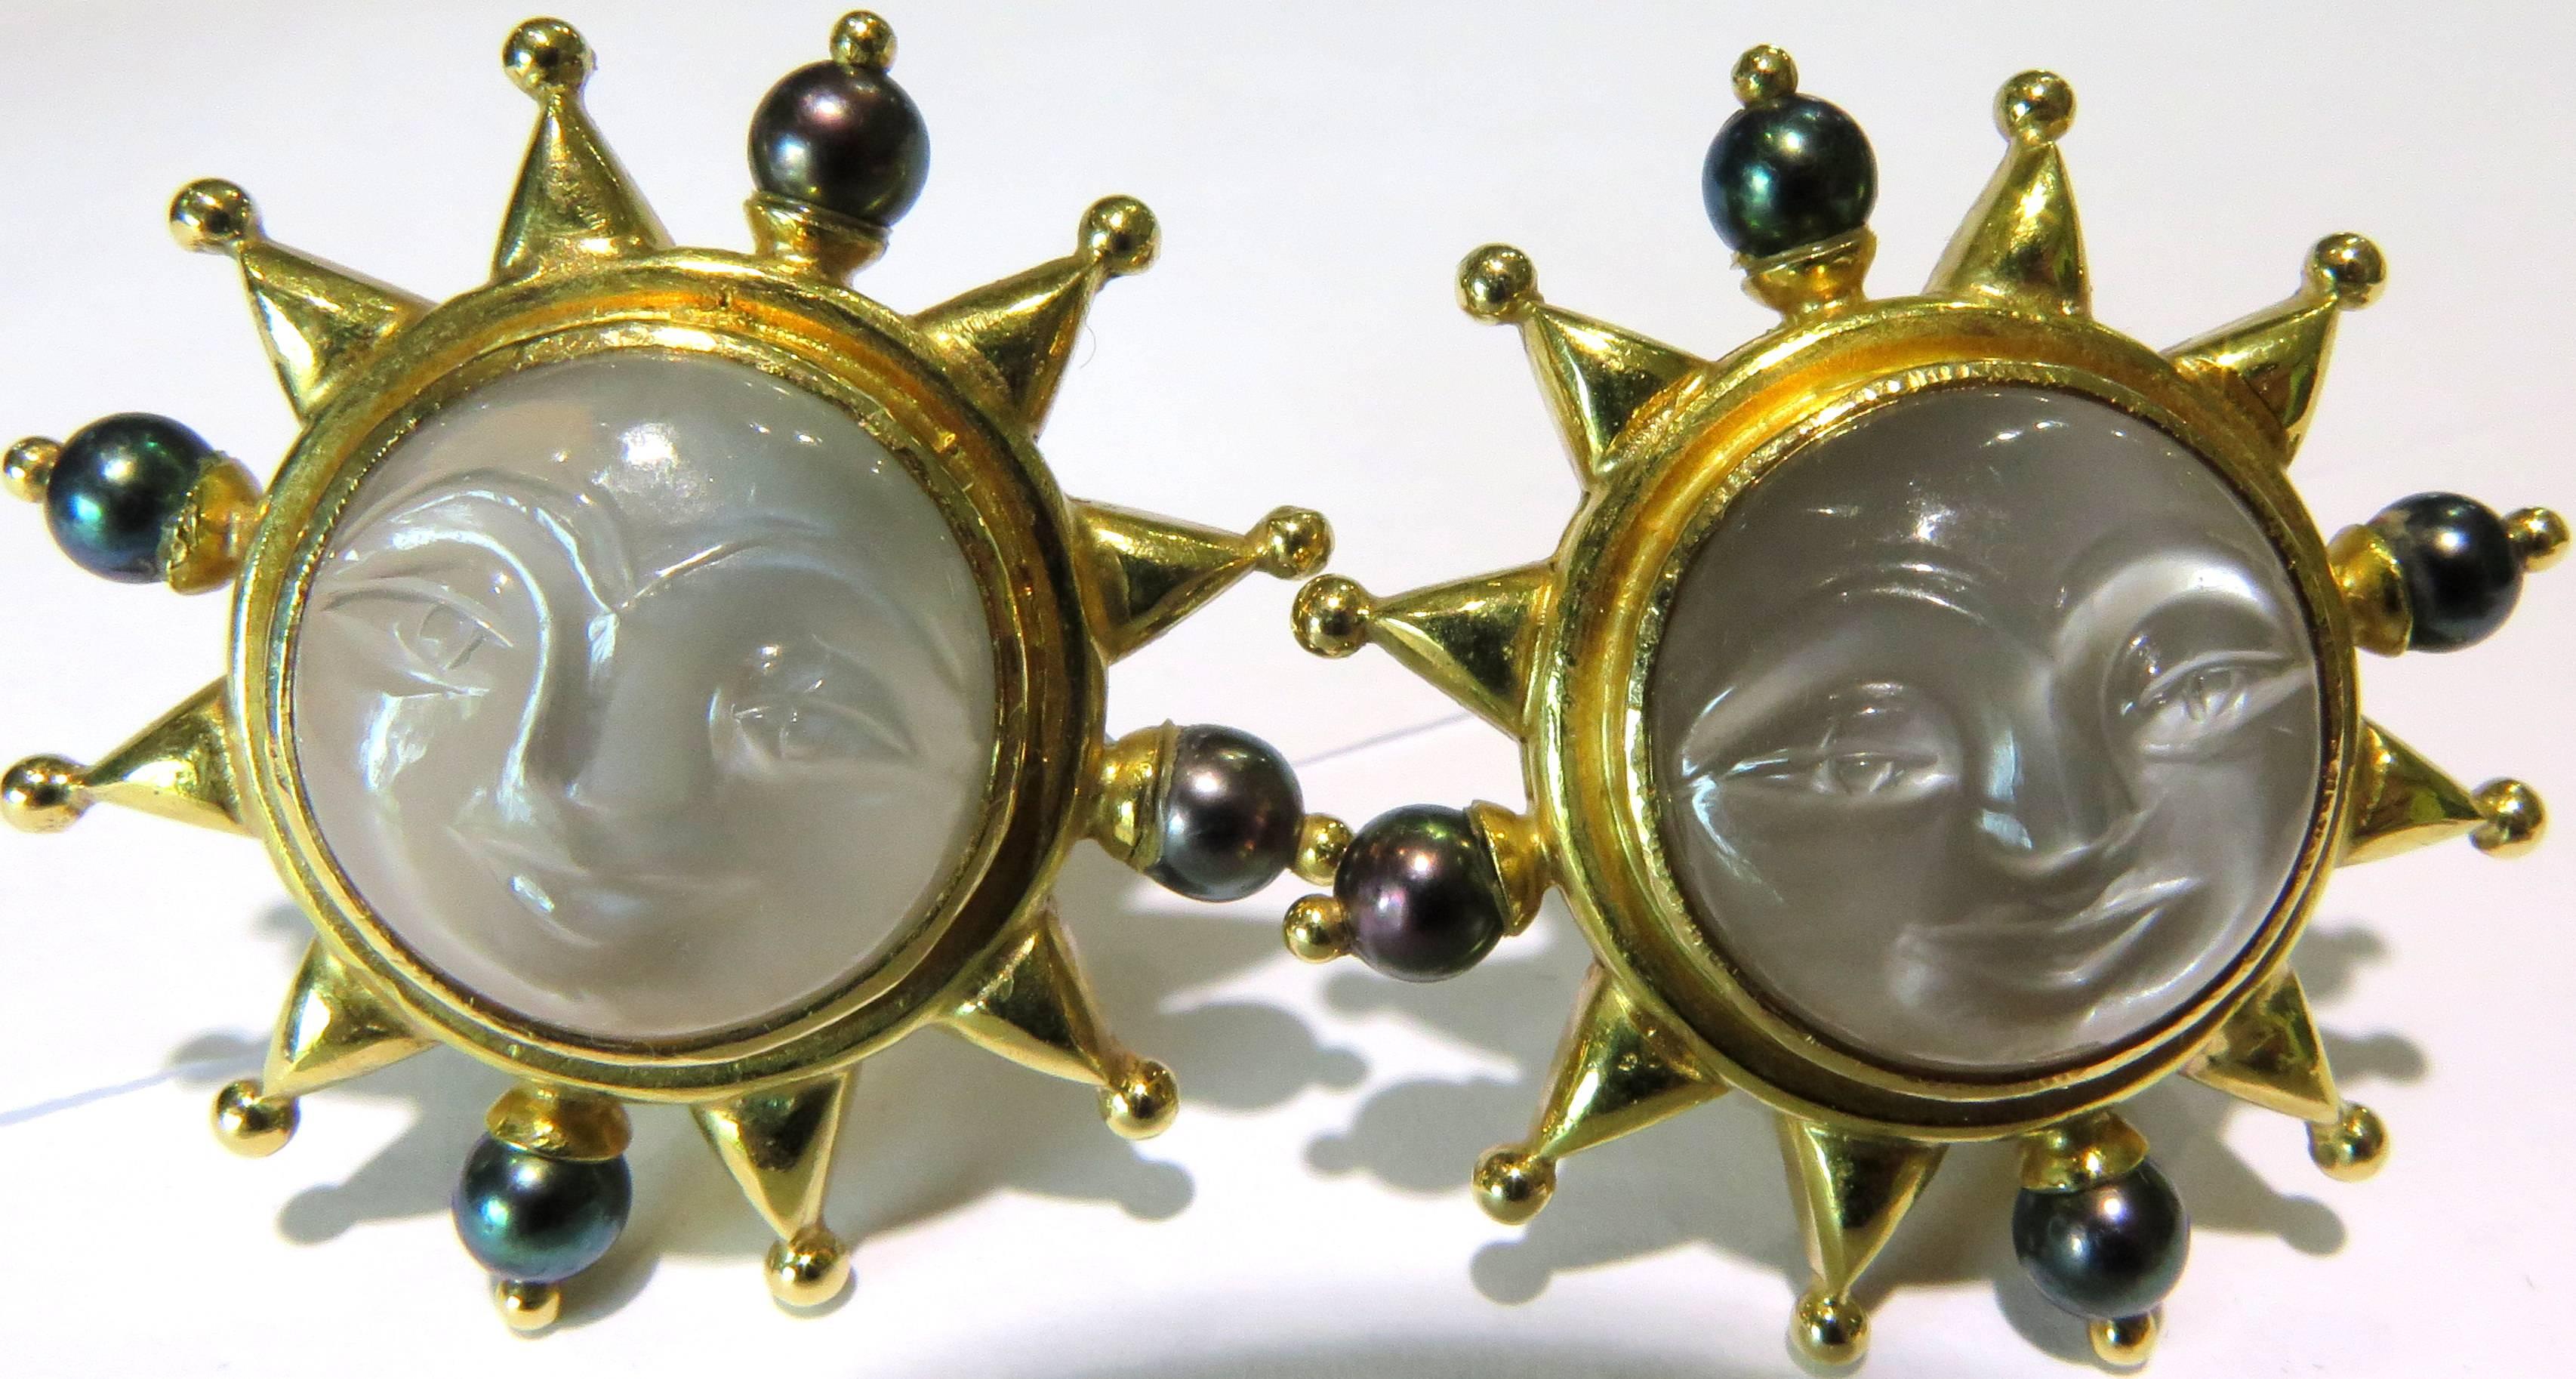 These Elizabeth Locke carved moonstone earrings are my favorite of all her pieces. I love how the black pearls are positioned like the directions of a map. These earrings are 18k gold and have the intertwined EL mark, for Elizabeth Locke. These